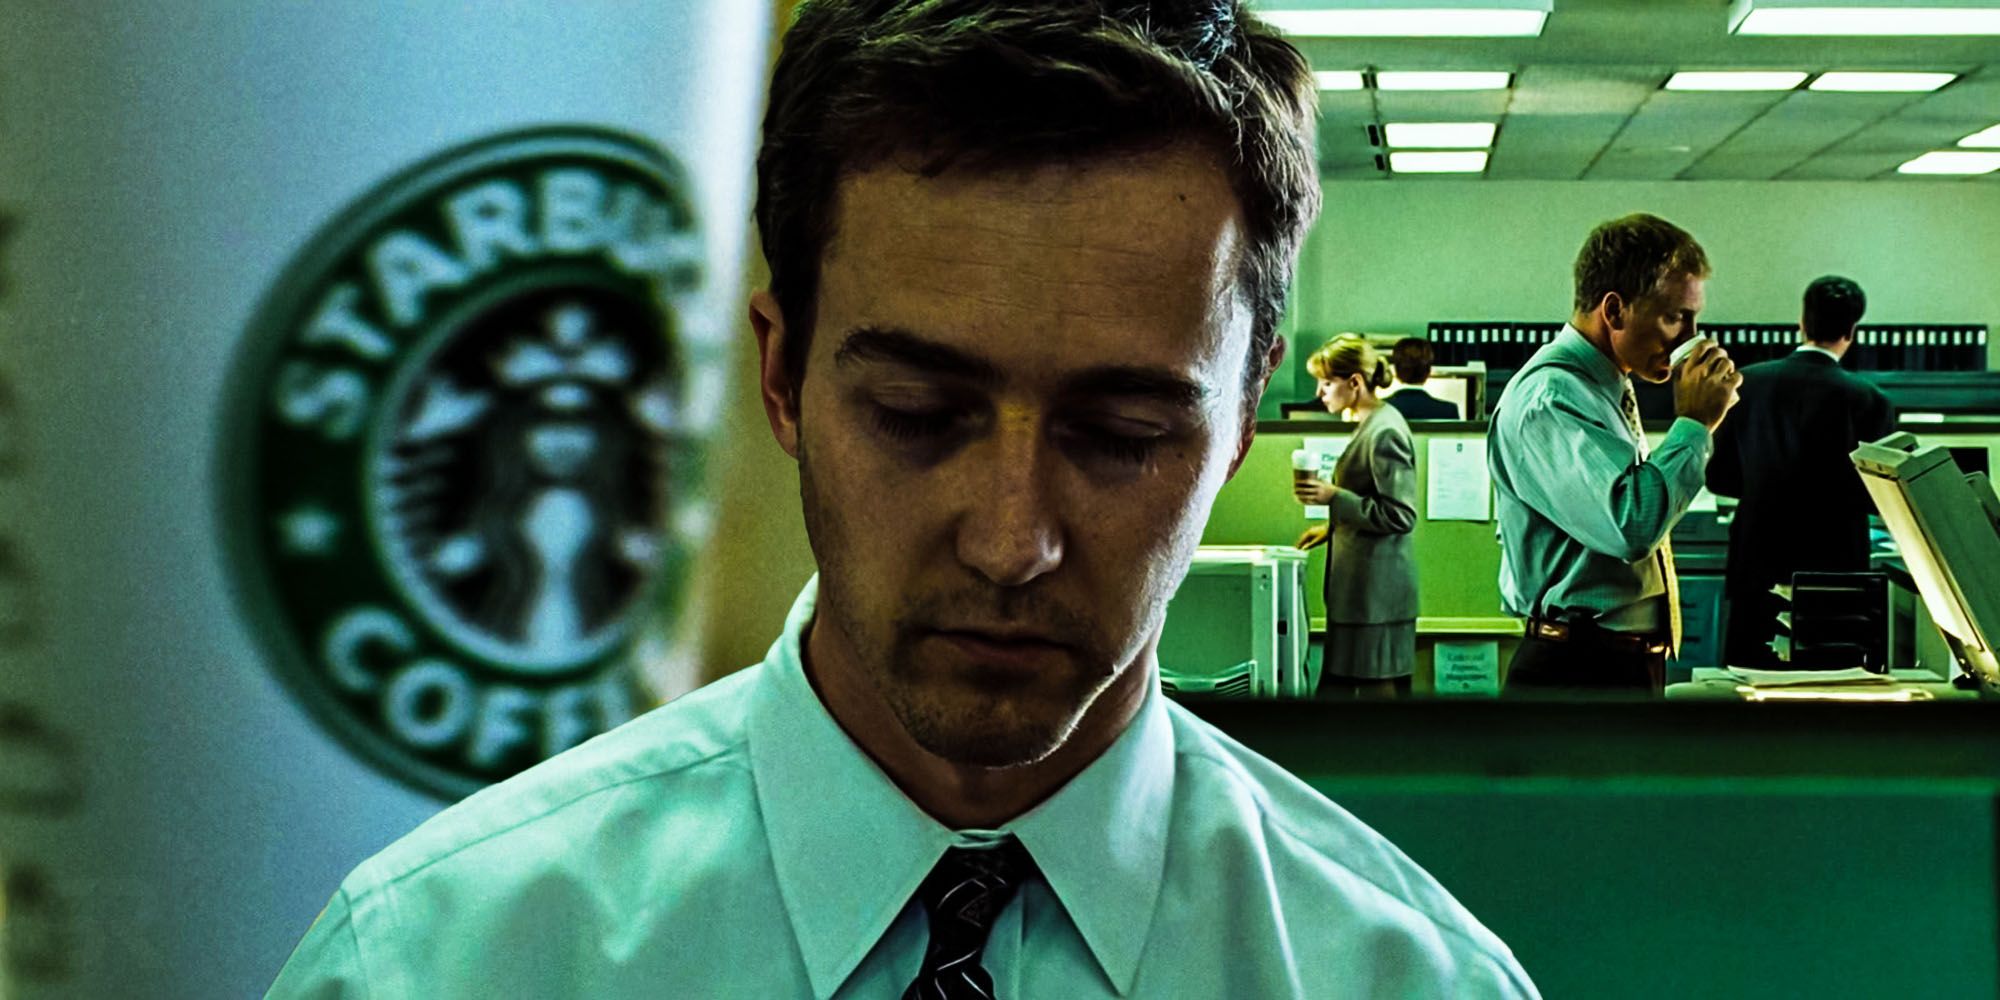 Fight Club Starbucks Coffee cup easter egg.